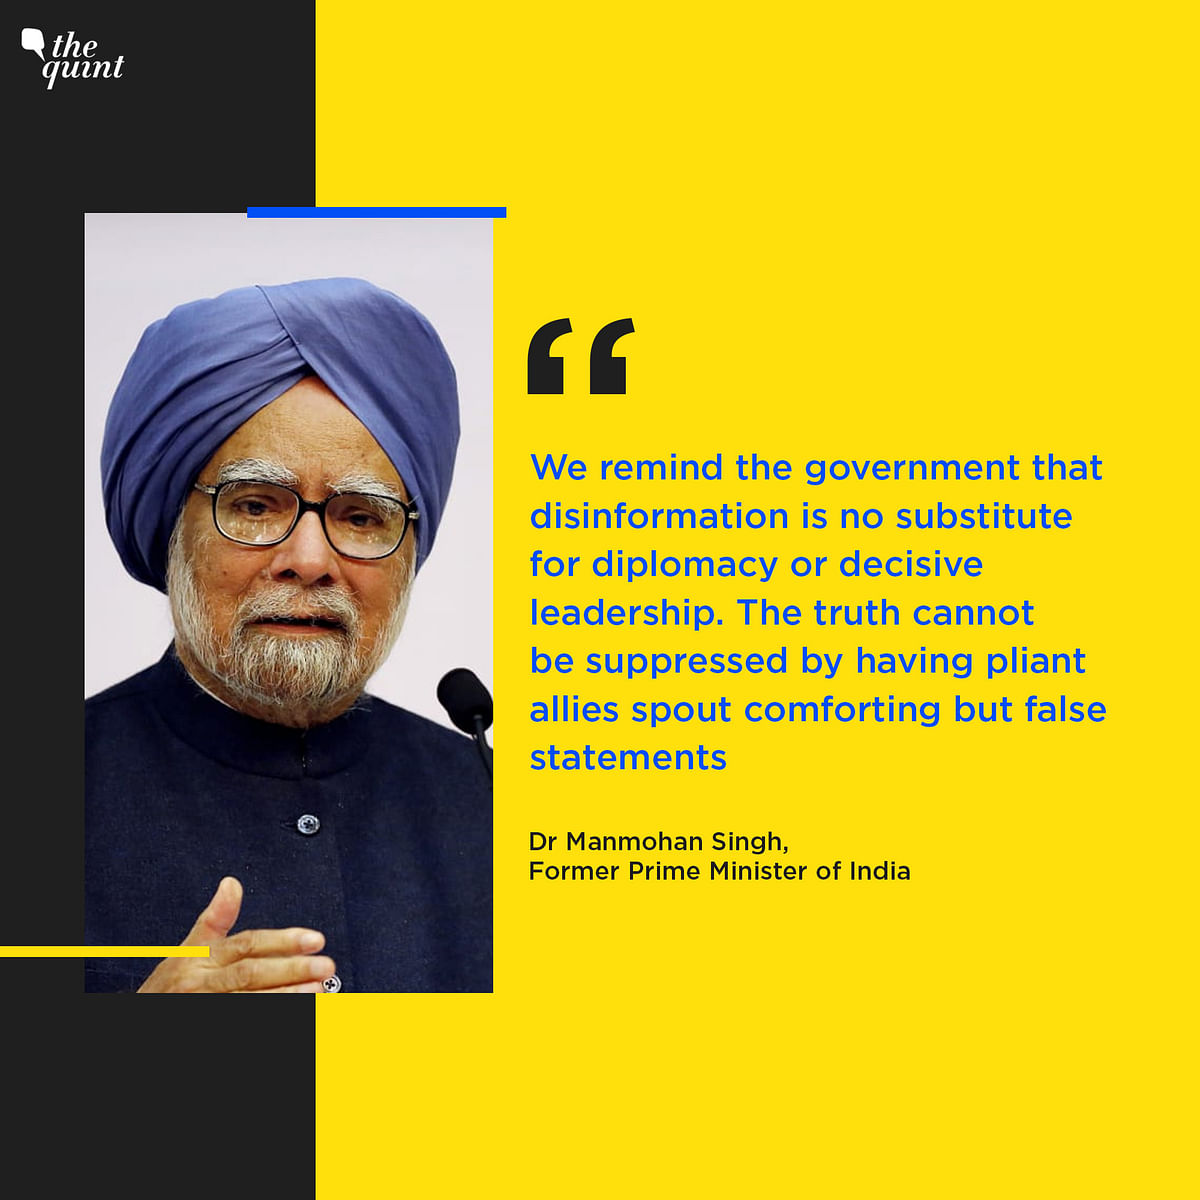 Singh said that PM Modi needs to be mindful of his words so China doesn’t take them as a vindication of their stand.